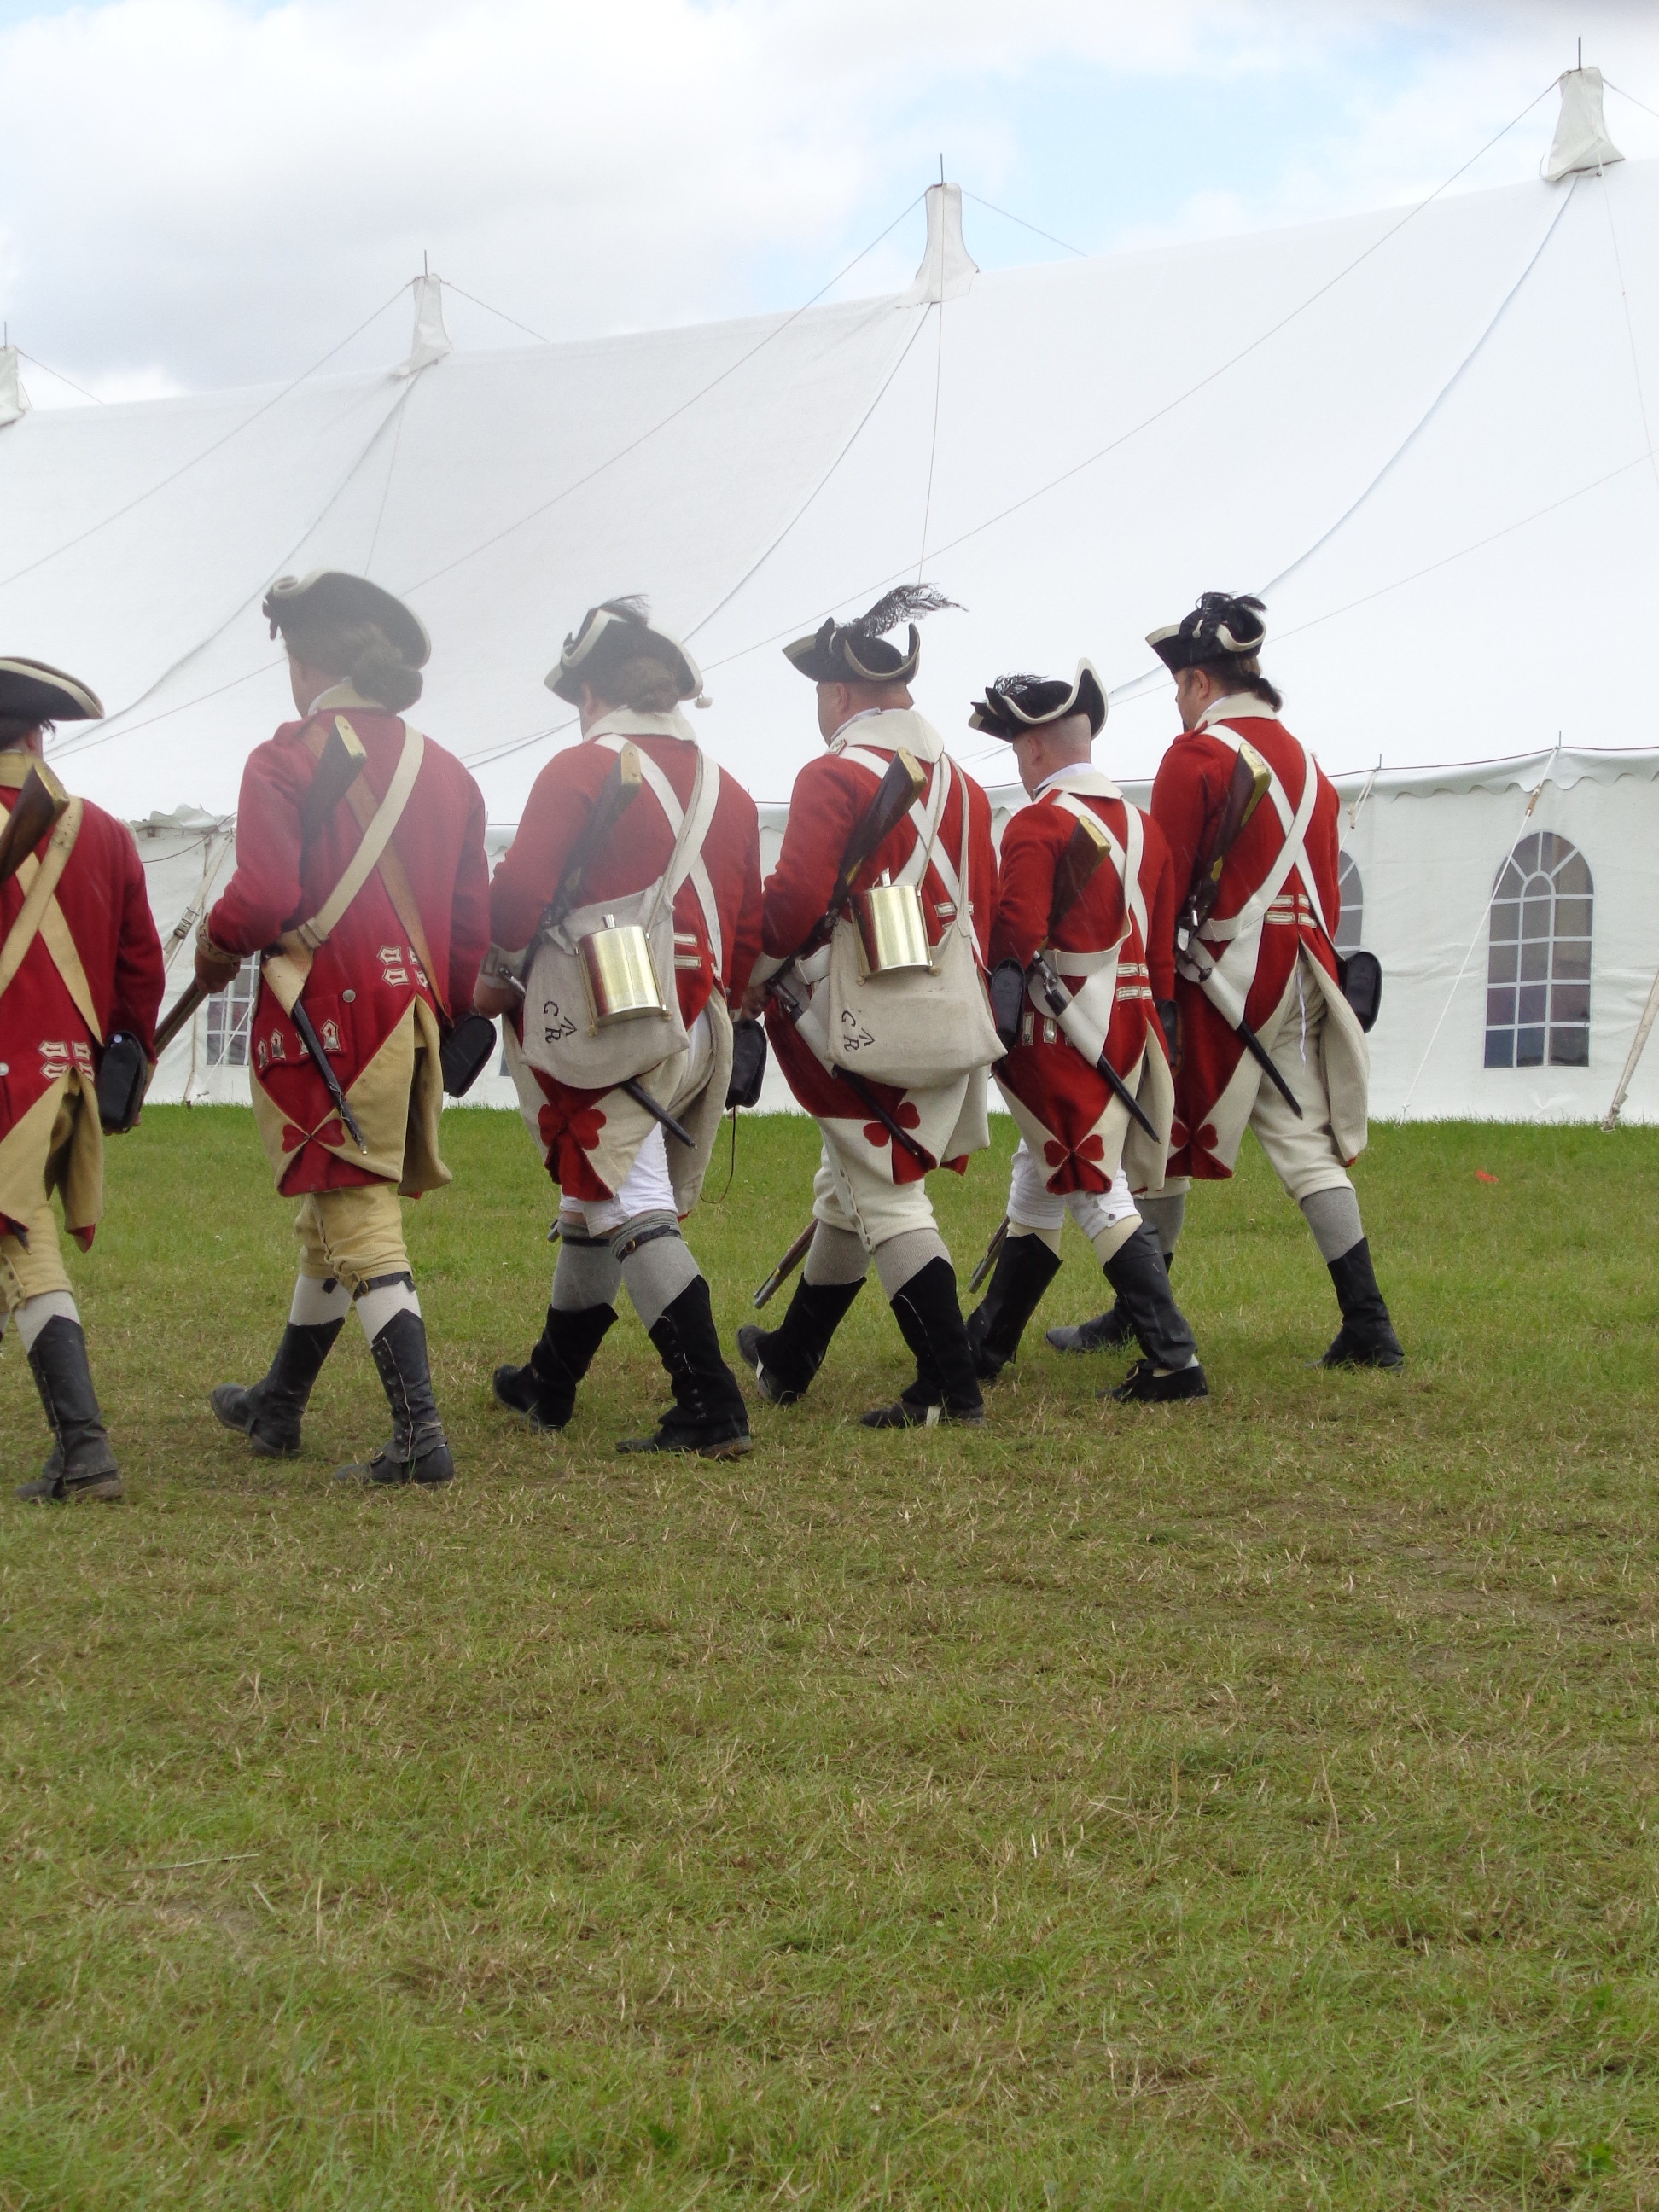 Soldiers in 18th c military uniform, handbound historical costumiers